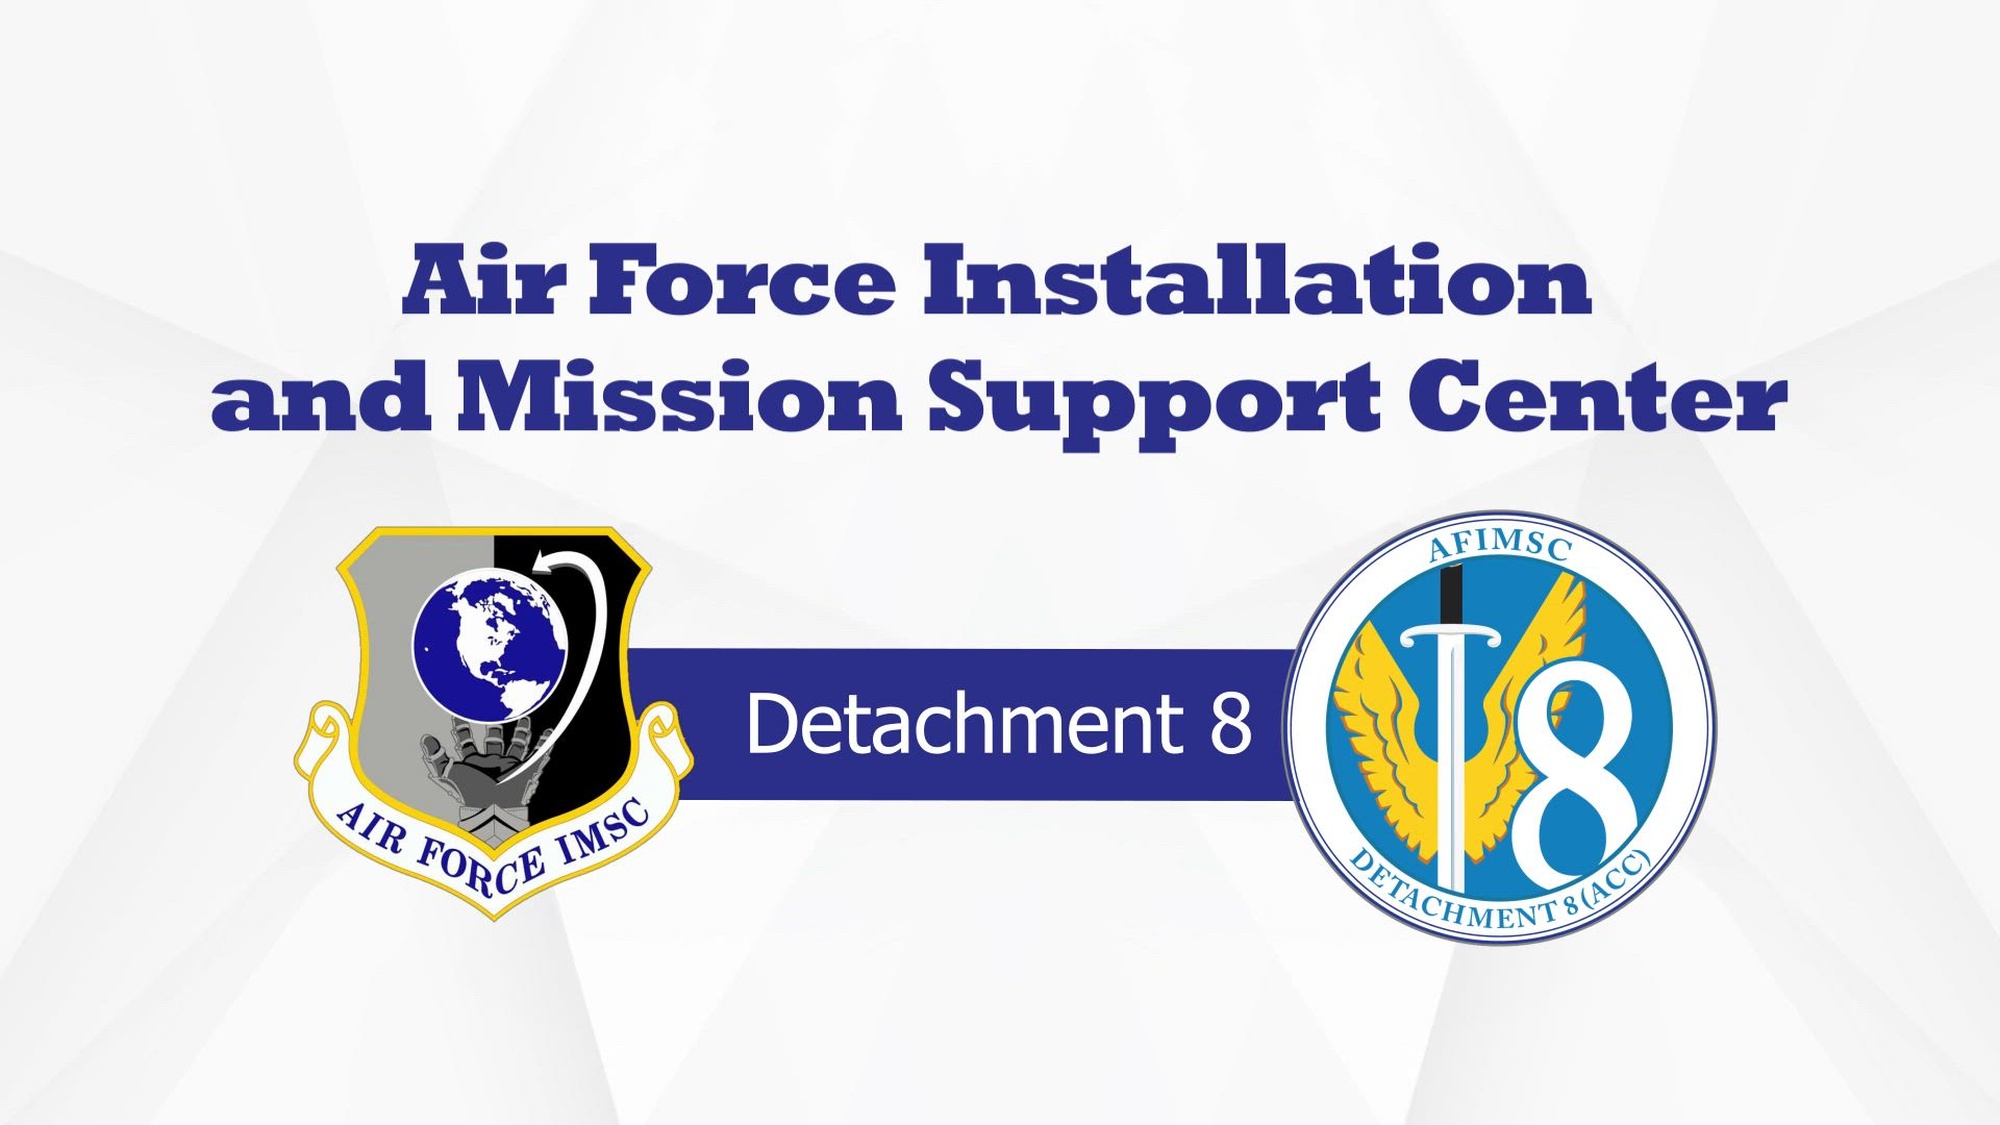 Air Force Installation and Mission Support Center Detachment 8 provides daily installation and mission support services to Air Combat Command so they can posture and generate combat-ready forces to project air power worldwide.